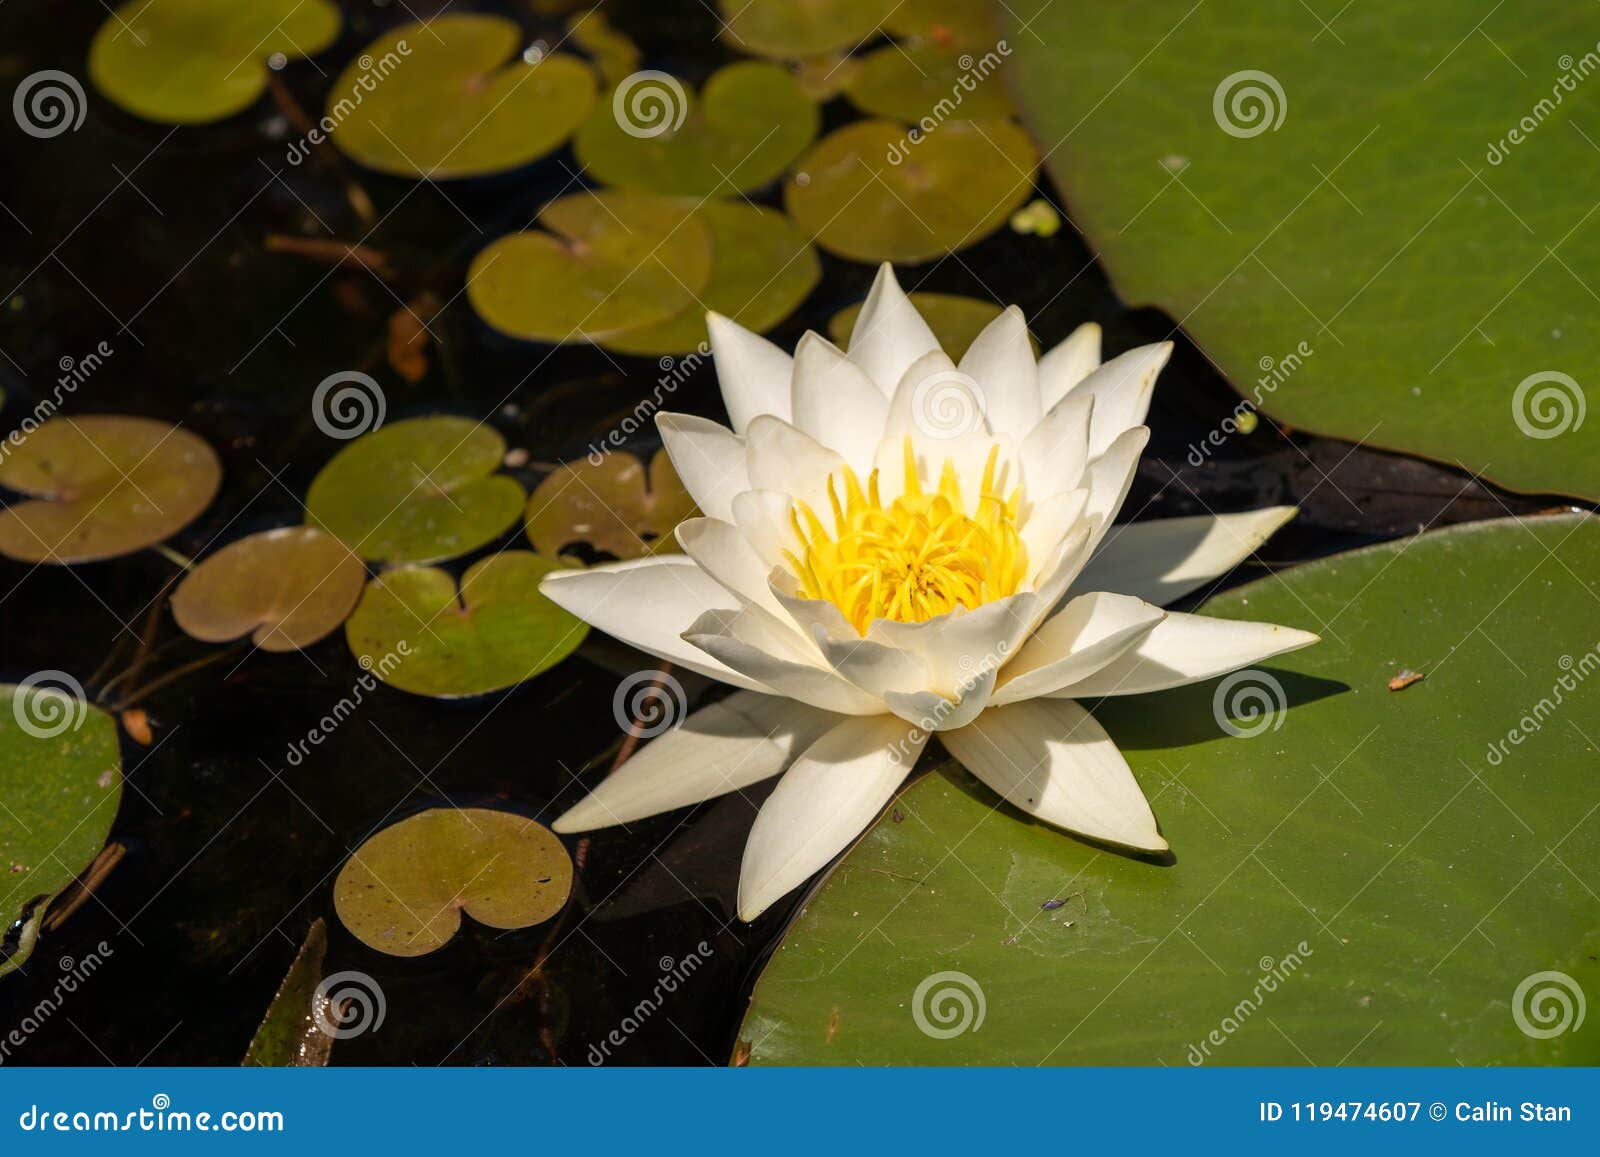 white lily lotus with yellow polen on dark background floating o